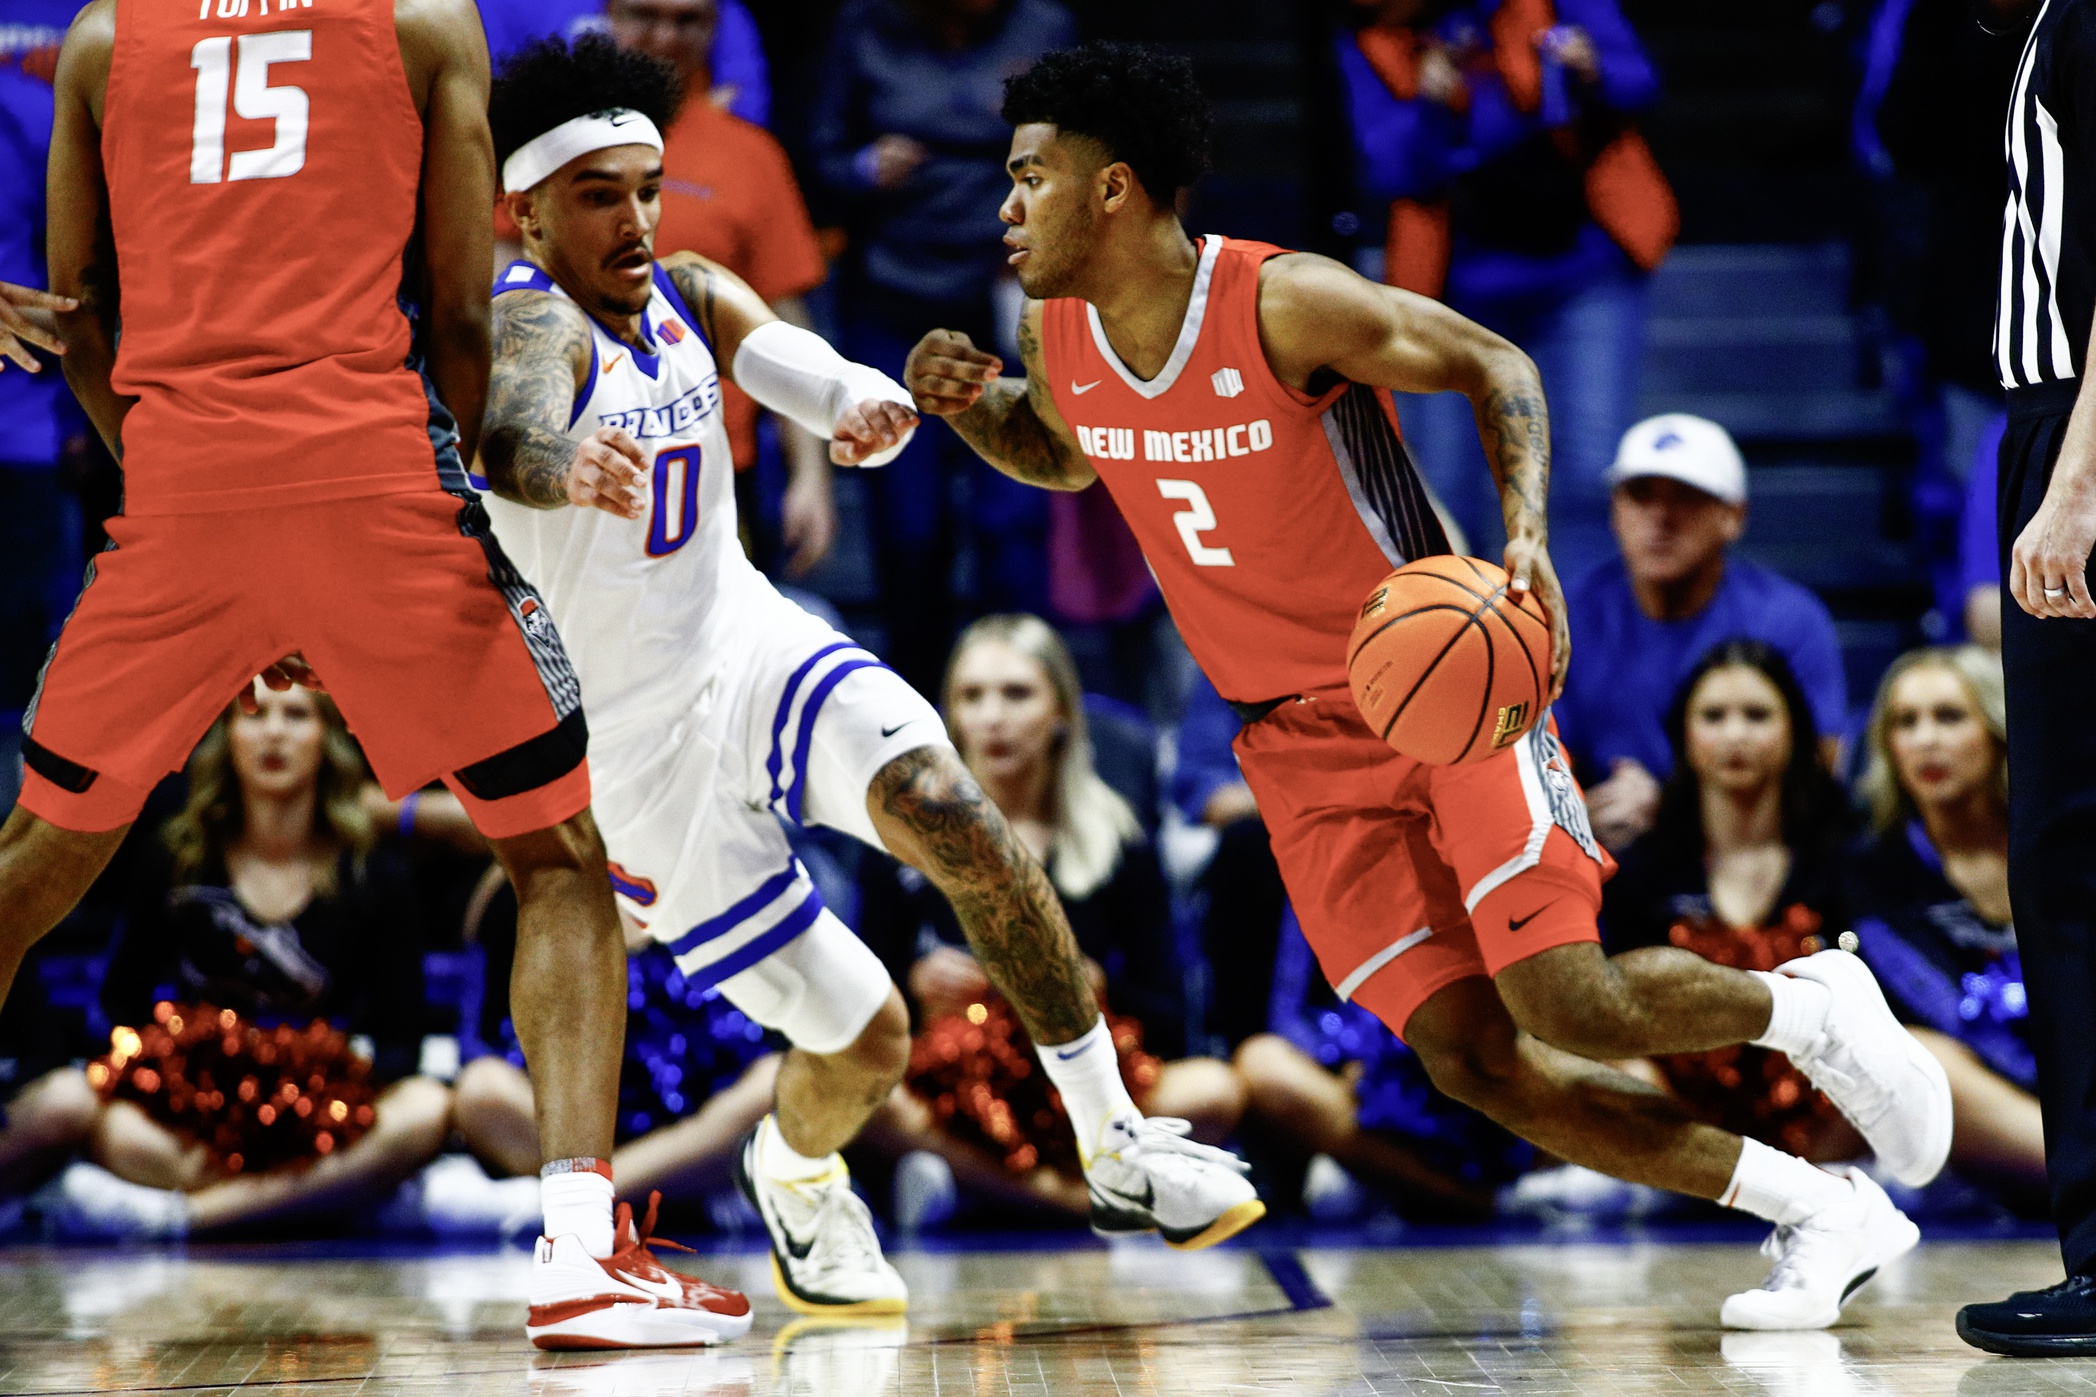 New Mexico Lobos guard Donovan Dent (2) drives as Boise State Broncos guard Roddie Anderson III (0) is screened by forward JT Toppin (15) during the second half aat ExtraMile Arena. Boise State defeats New Mexico 89-79. Mandatory Credit: Brian Losness-USA TODAY Sports